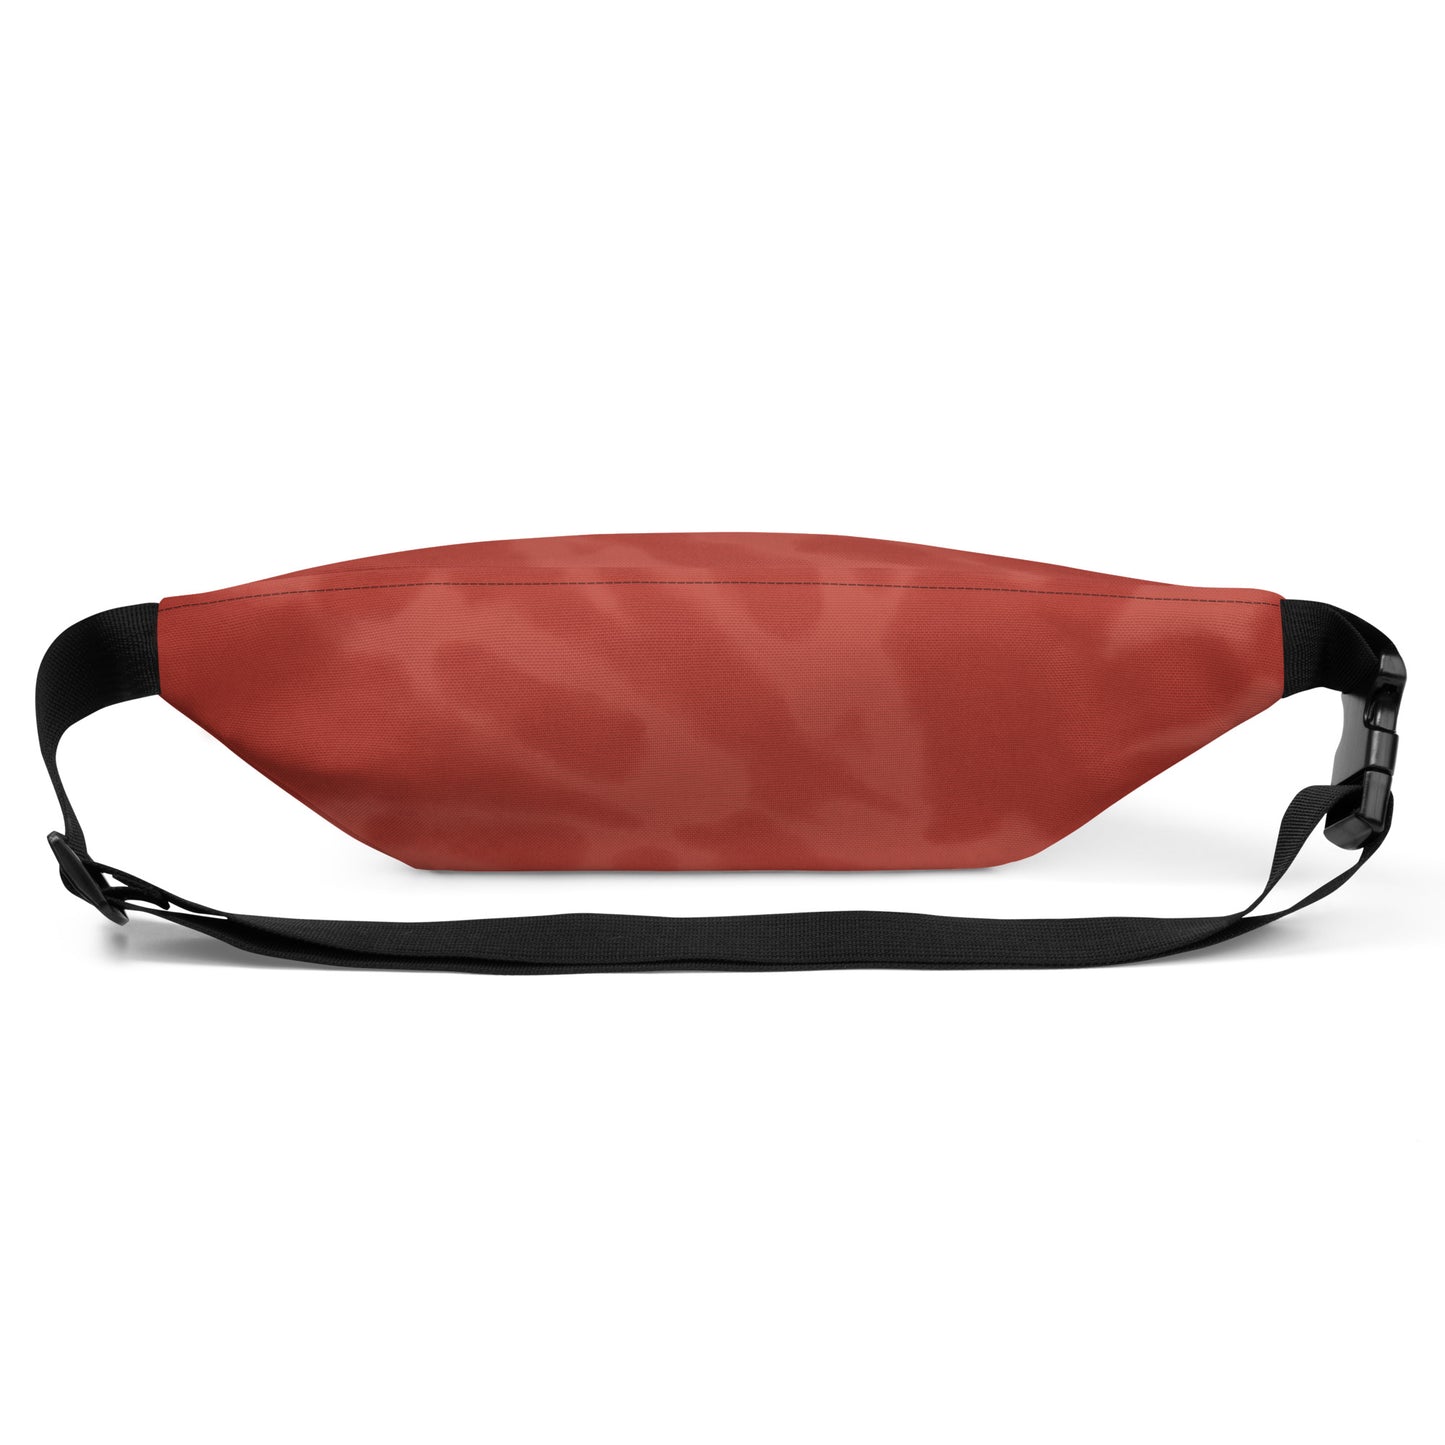 Travel Gift Fanny Pack - Red Tie-Dye • MAD Madrid • YHM Designs - Image 09